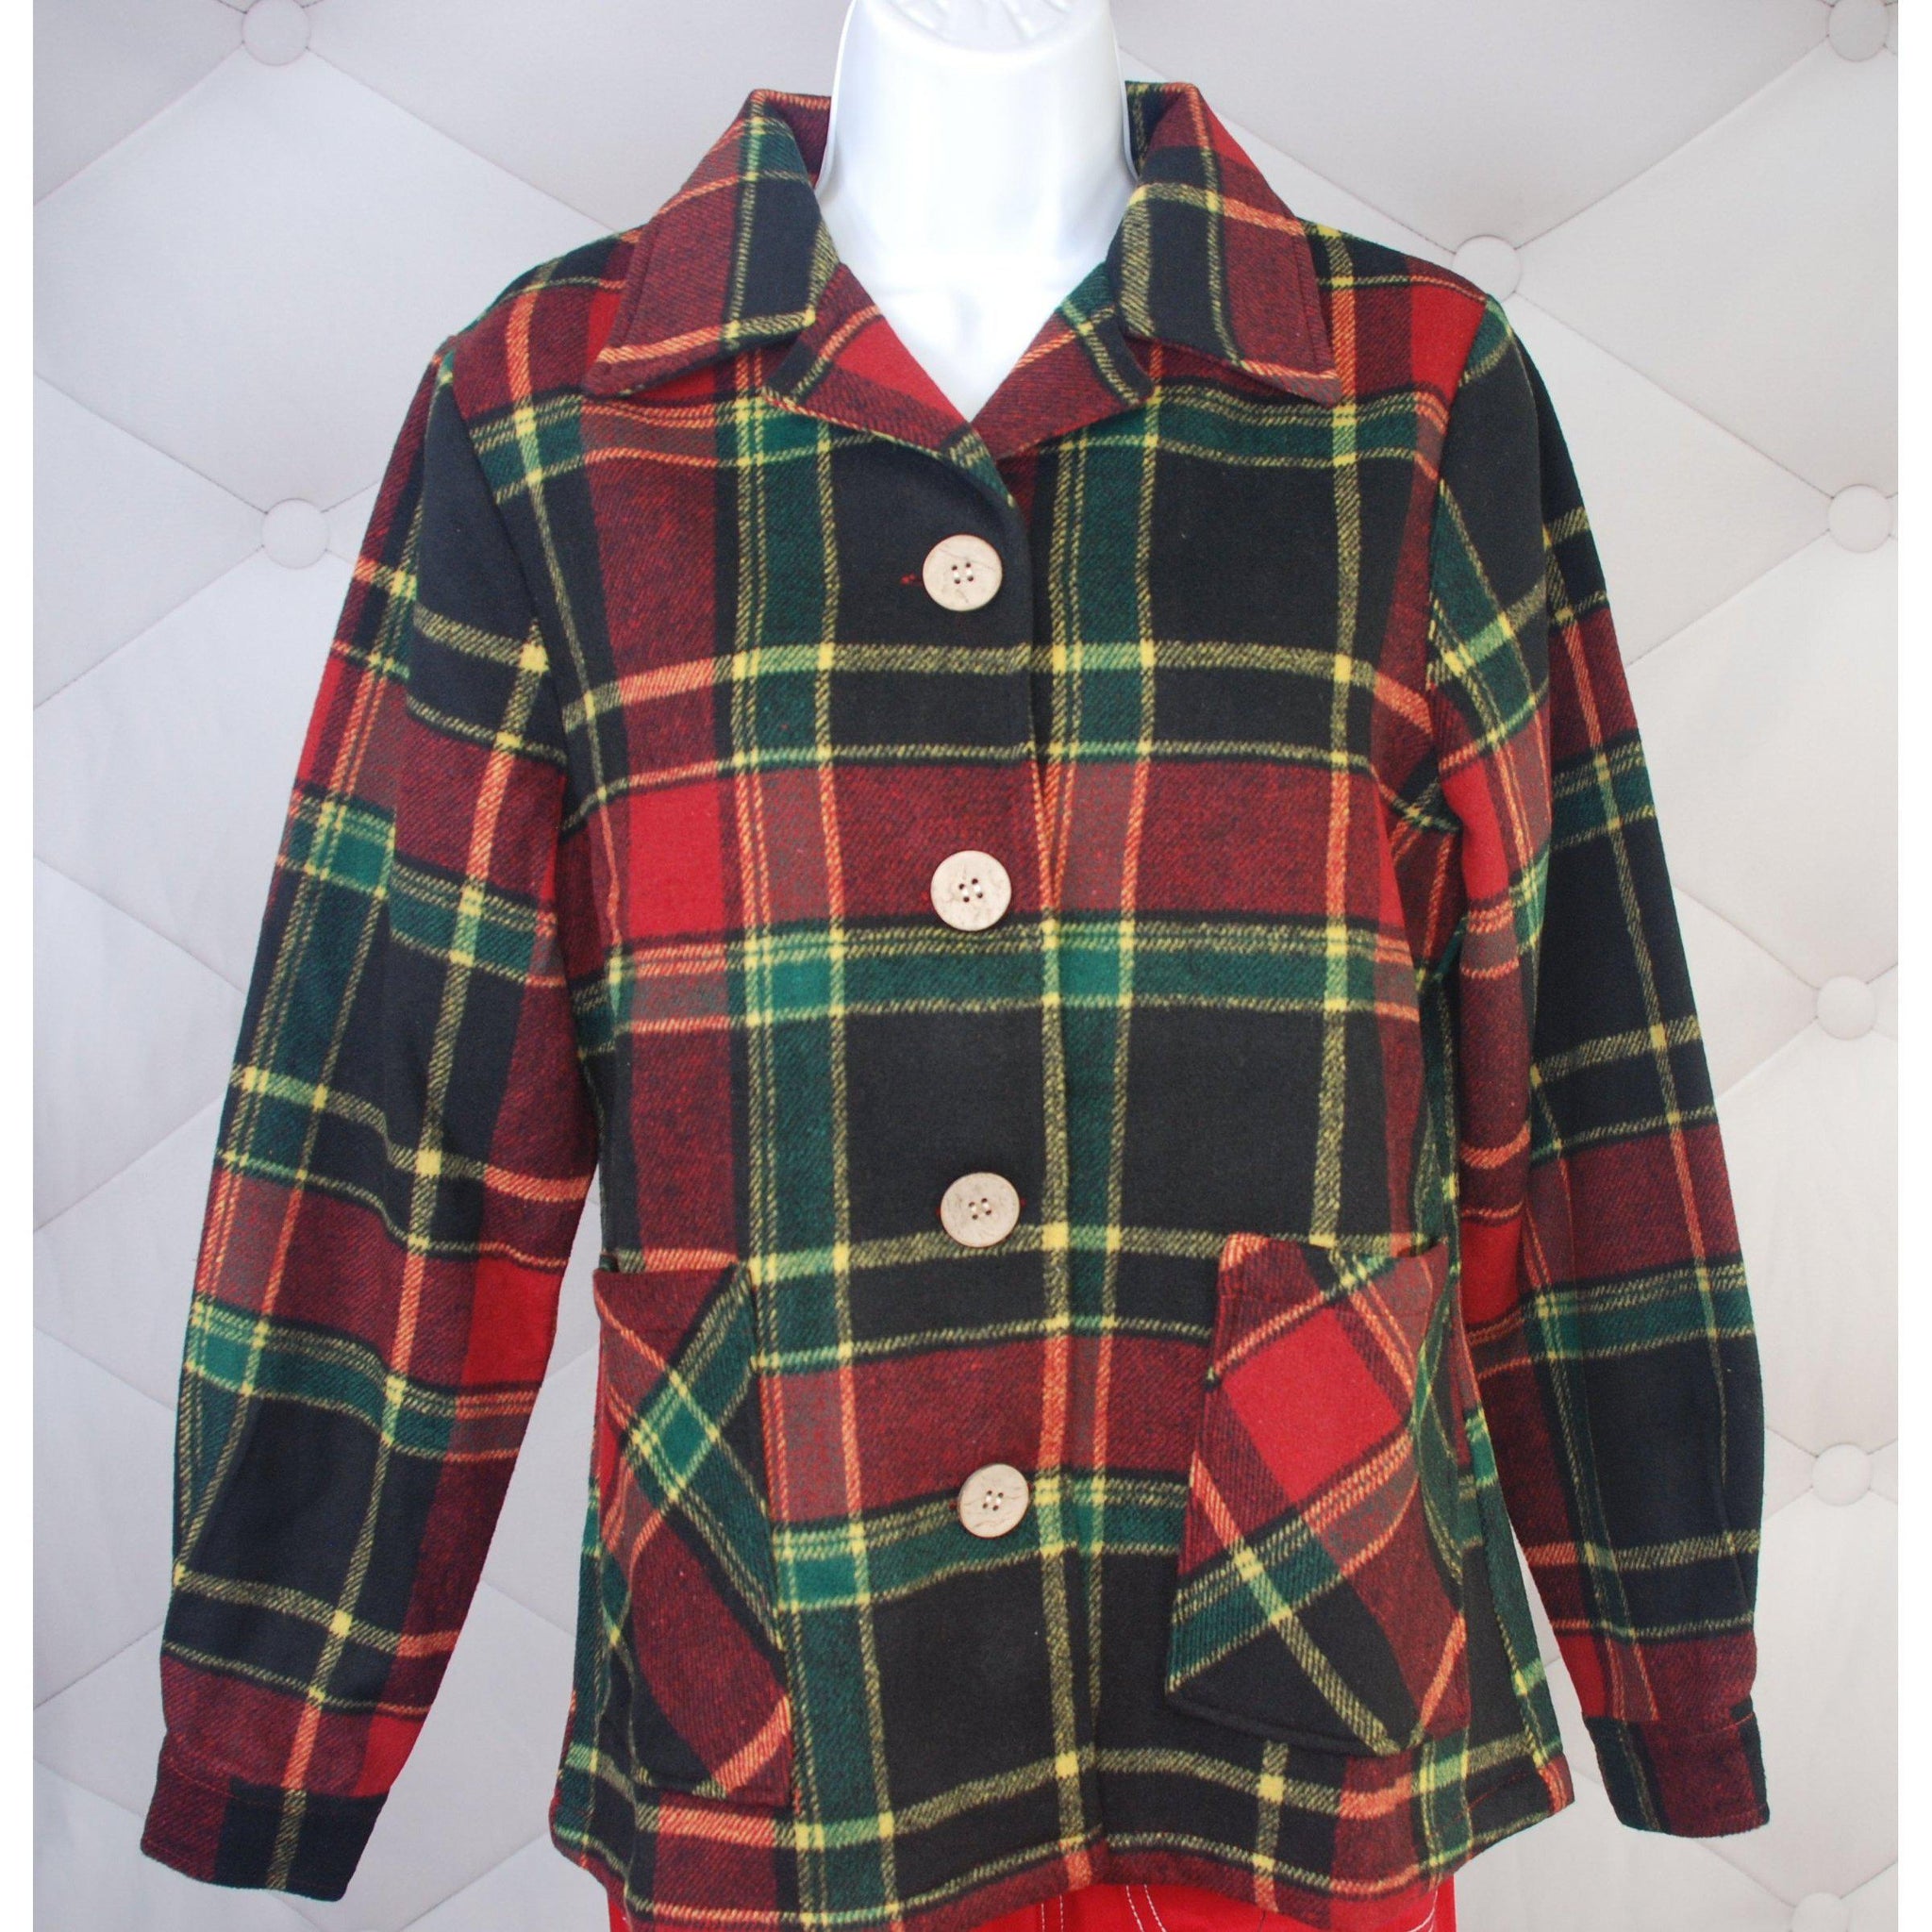 Star Struck Clothing Jacket in Green and Red Plaid – Glitz Glam and ...